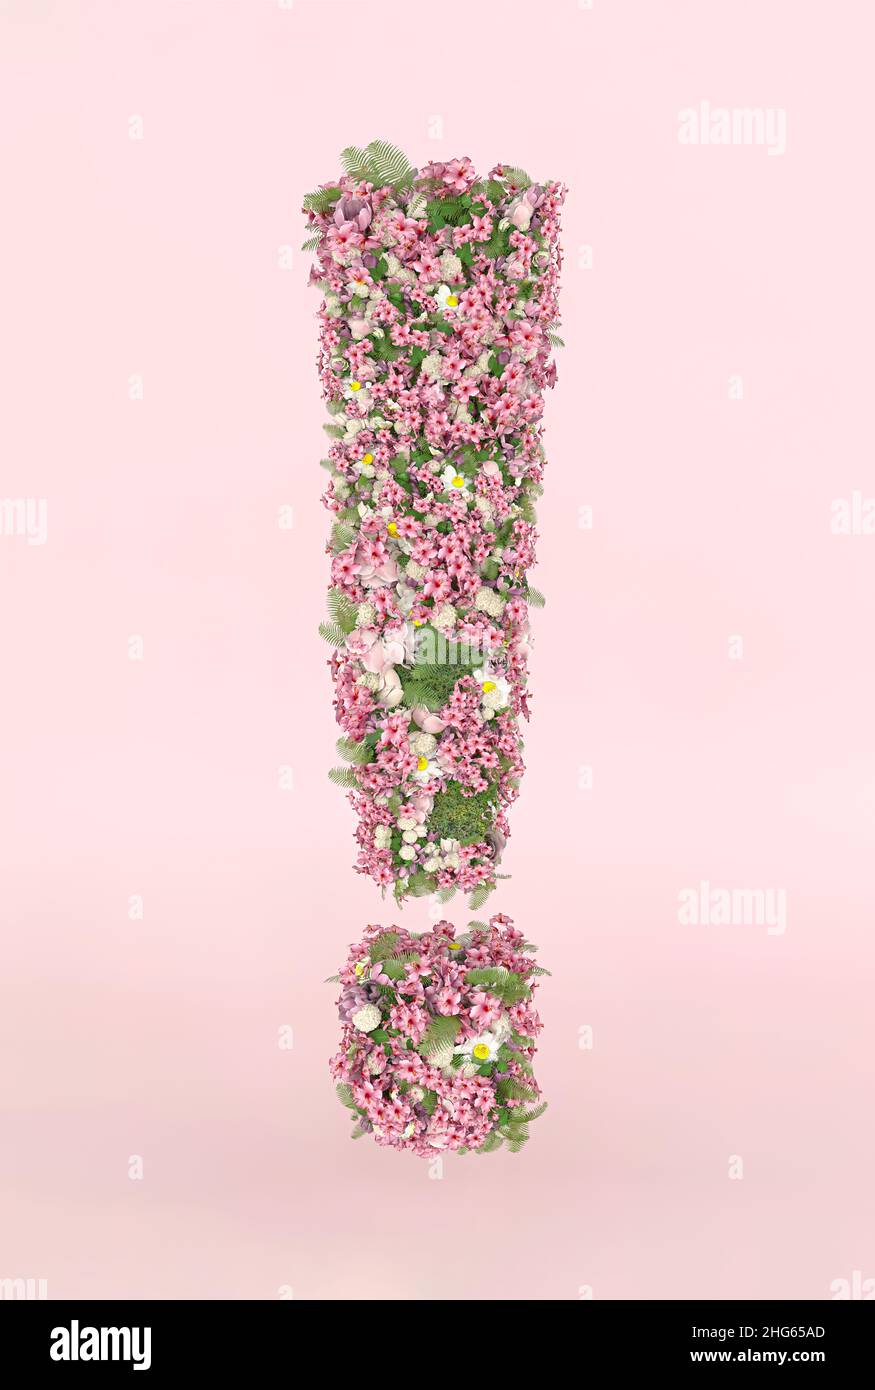 Creative exclamation mark concept made of fresh Spring wedding flowers. Flower font concept on pastel pink background. Stock Photo